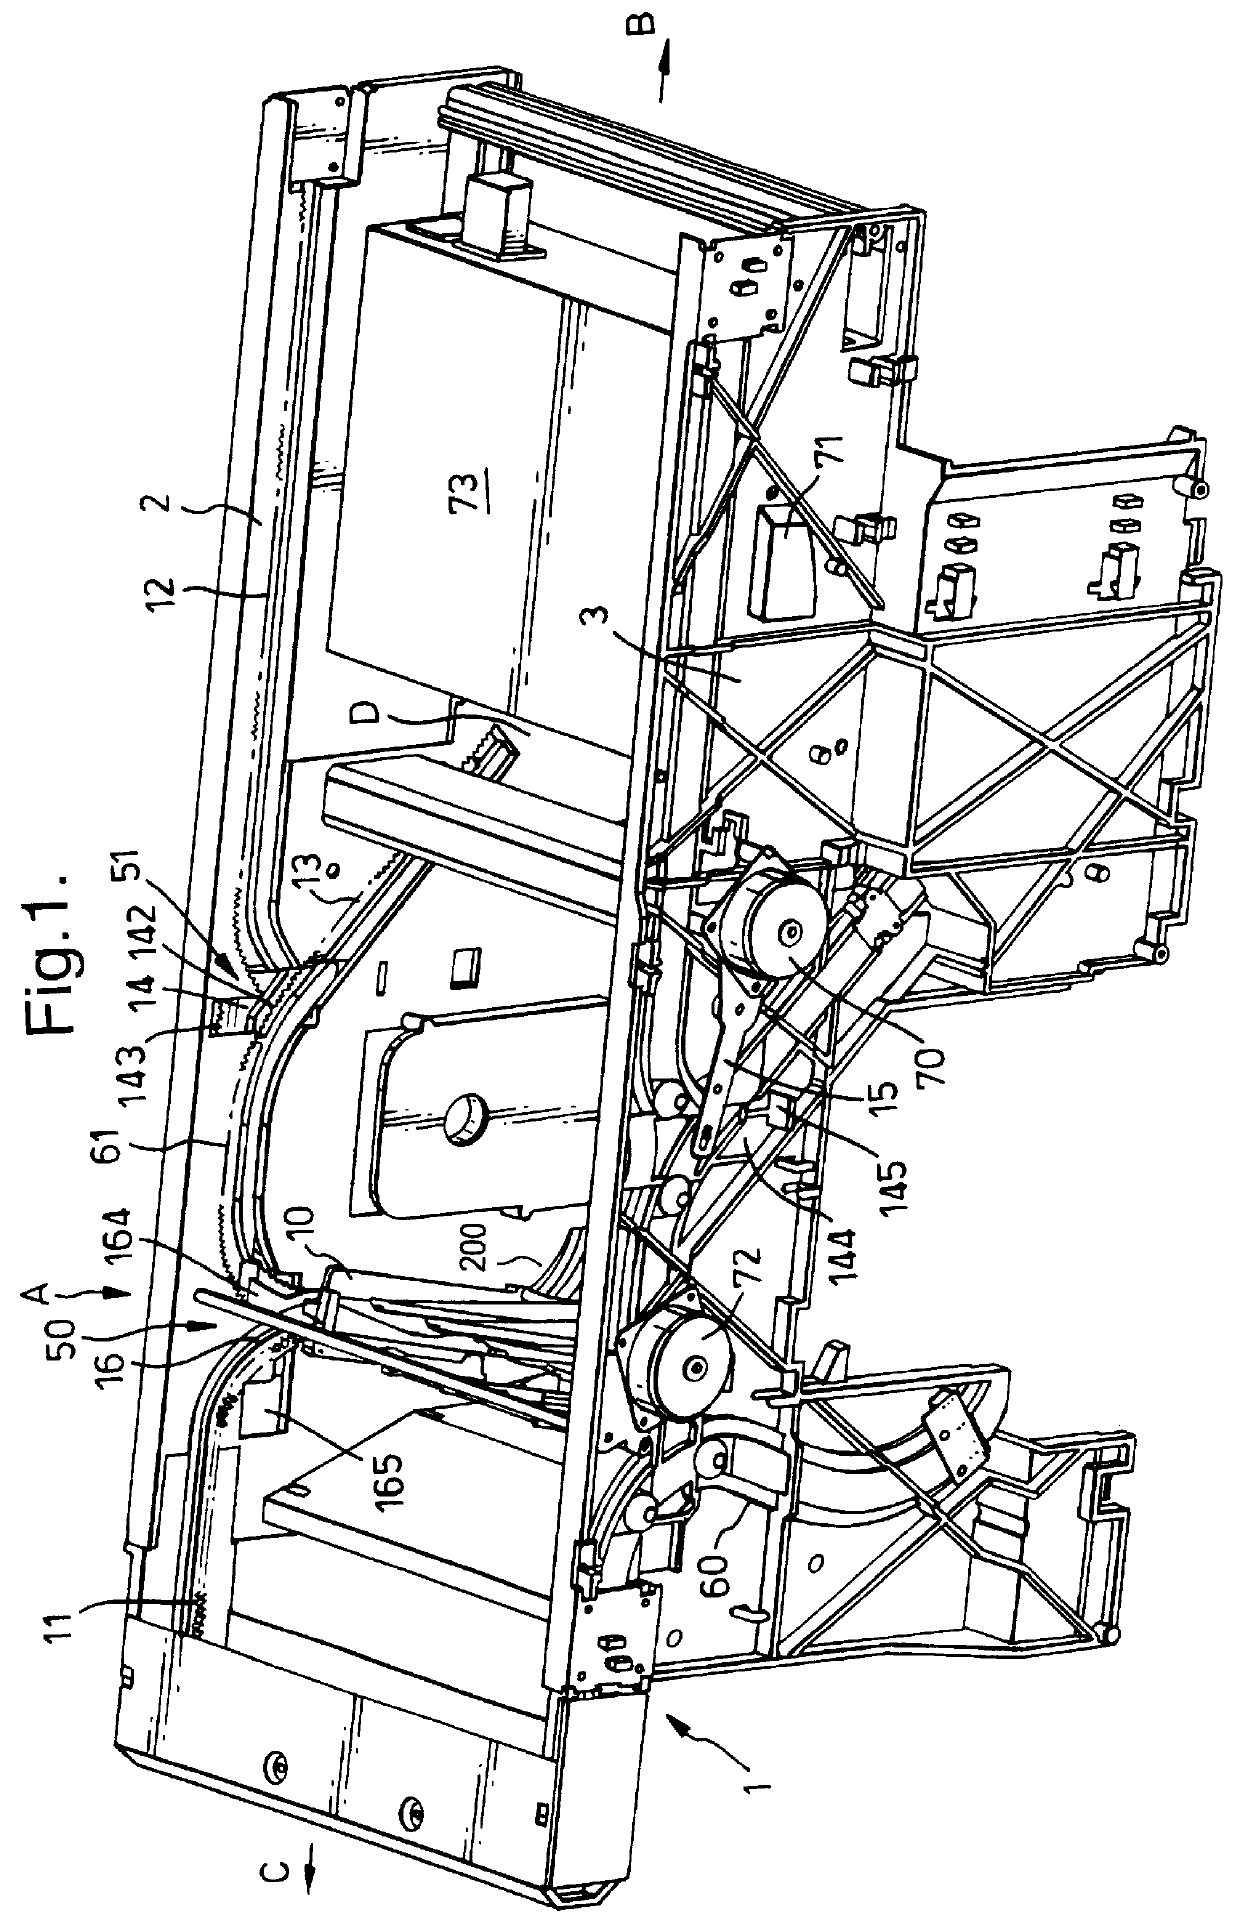 Apparatus for feeding sheets from a sheet store